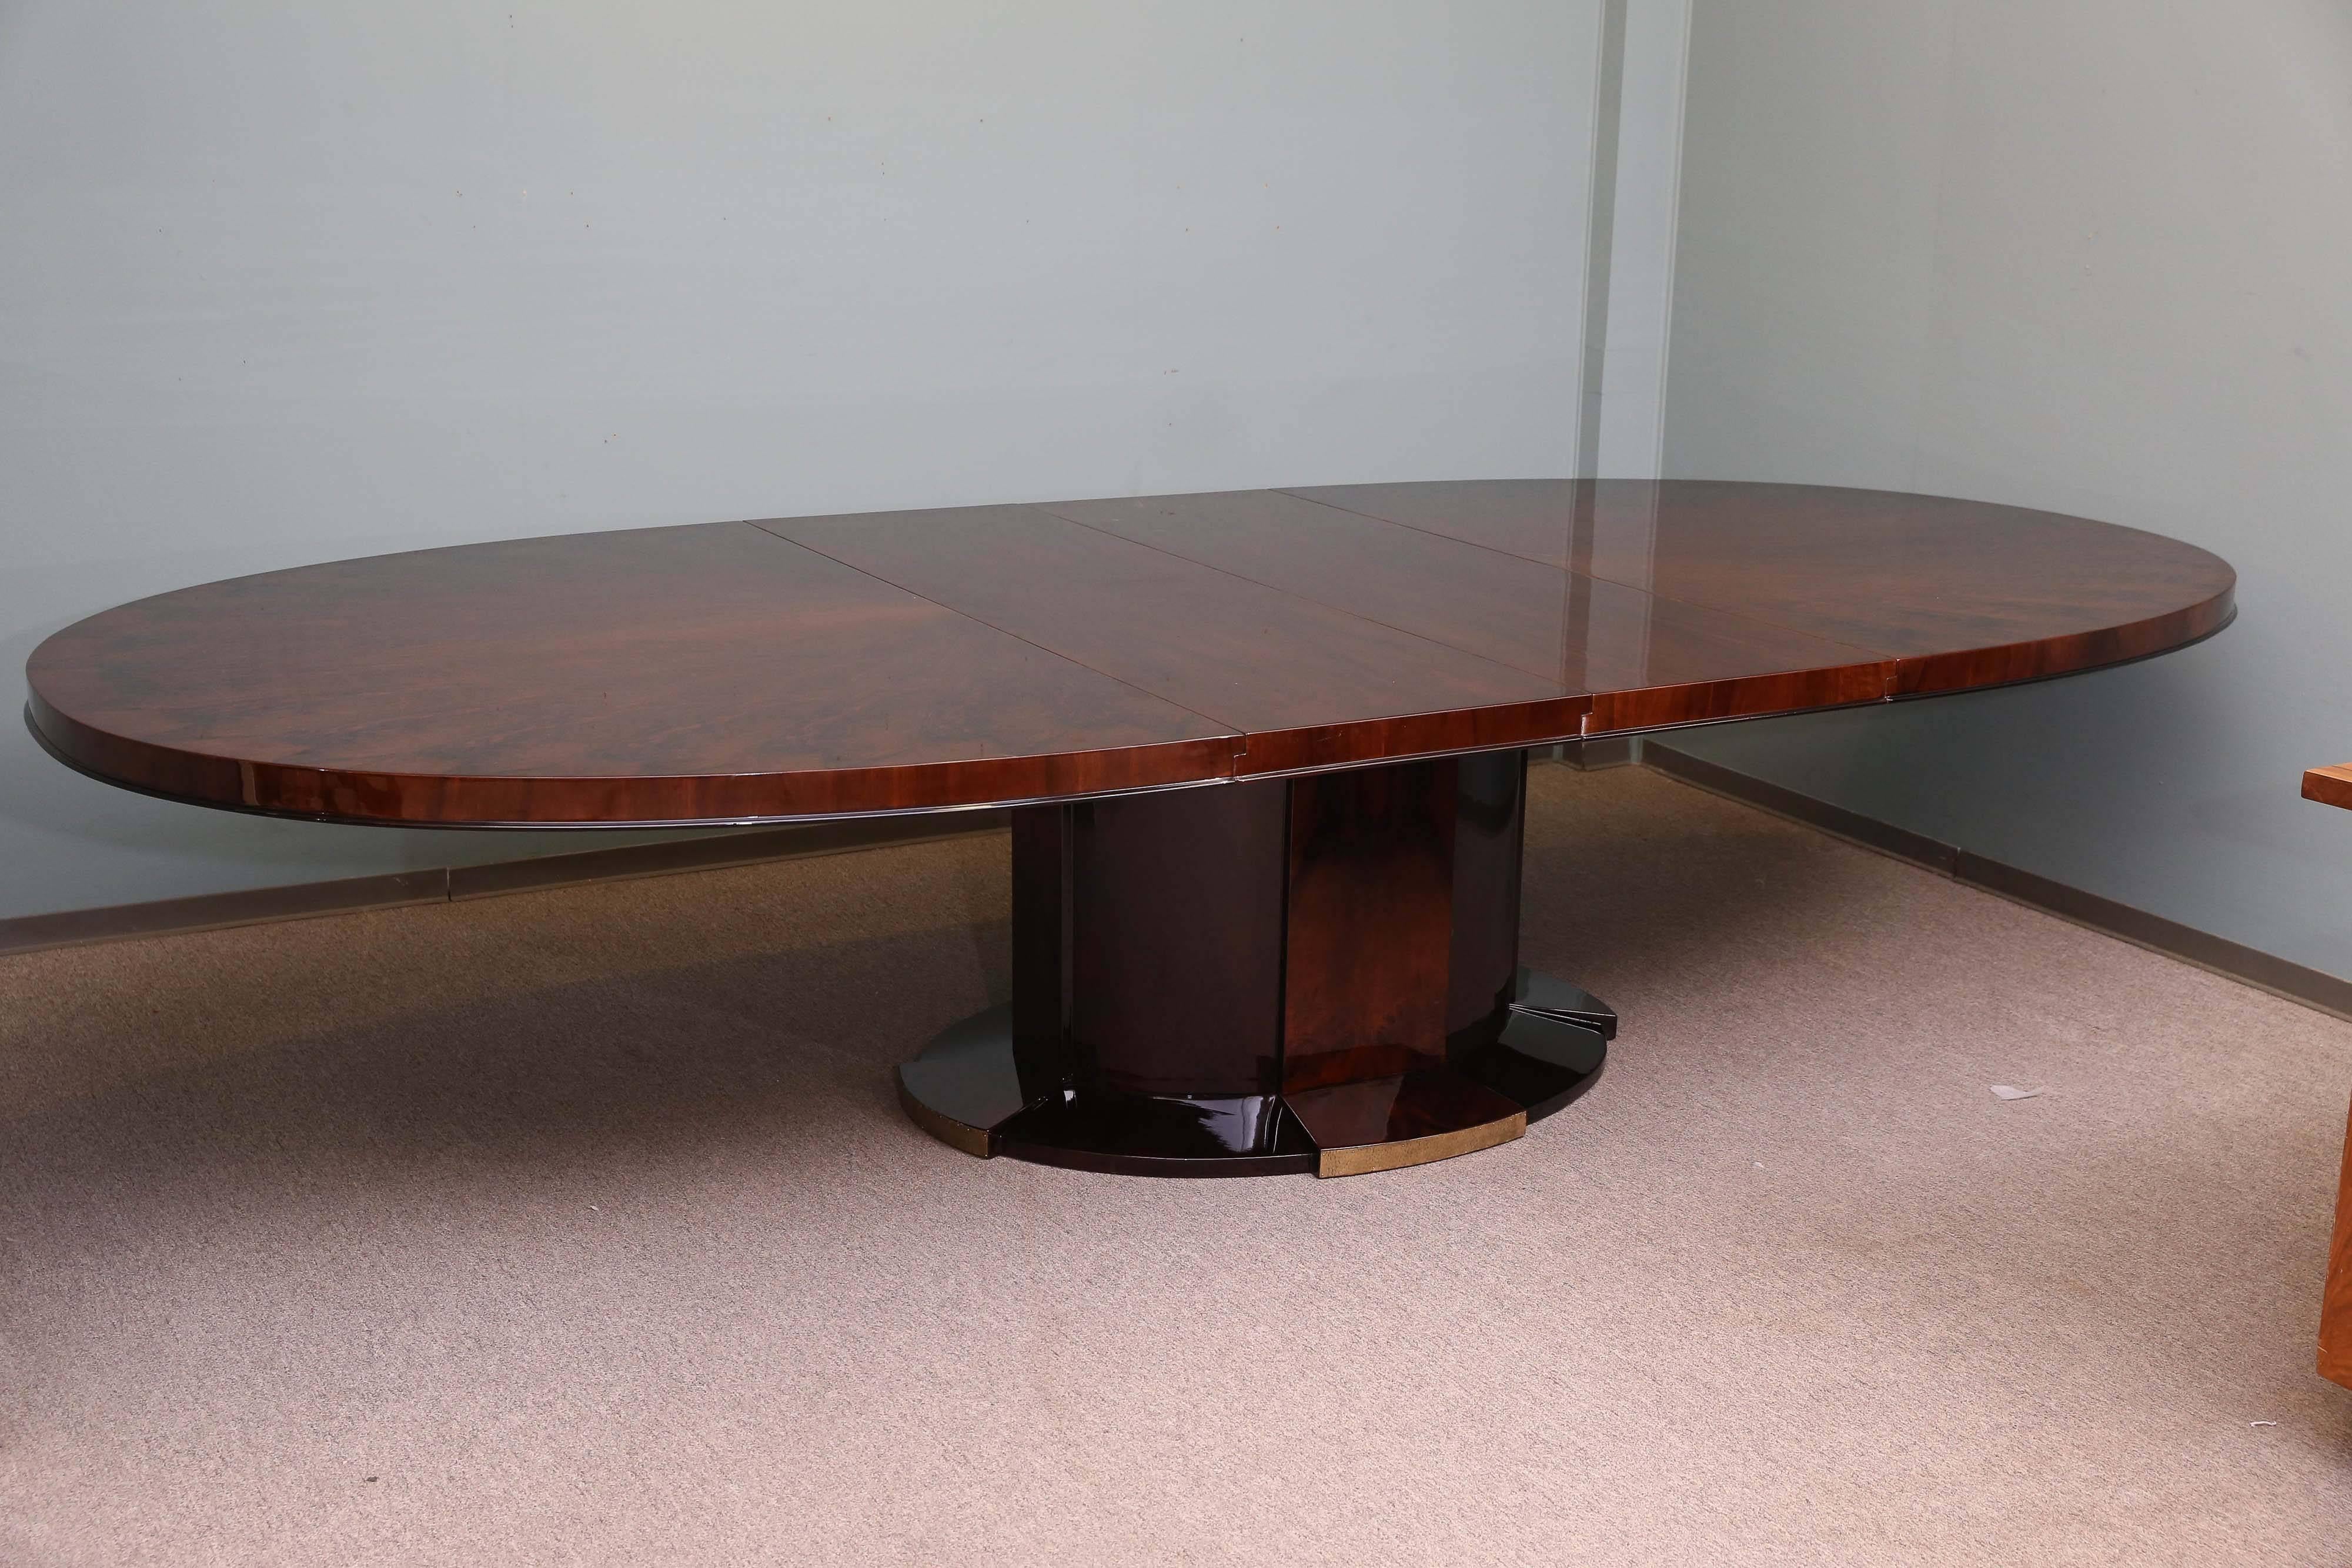 20th Century Art Deco Oval Dining Room Table